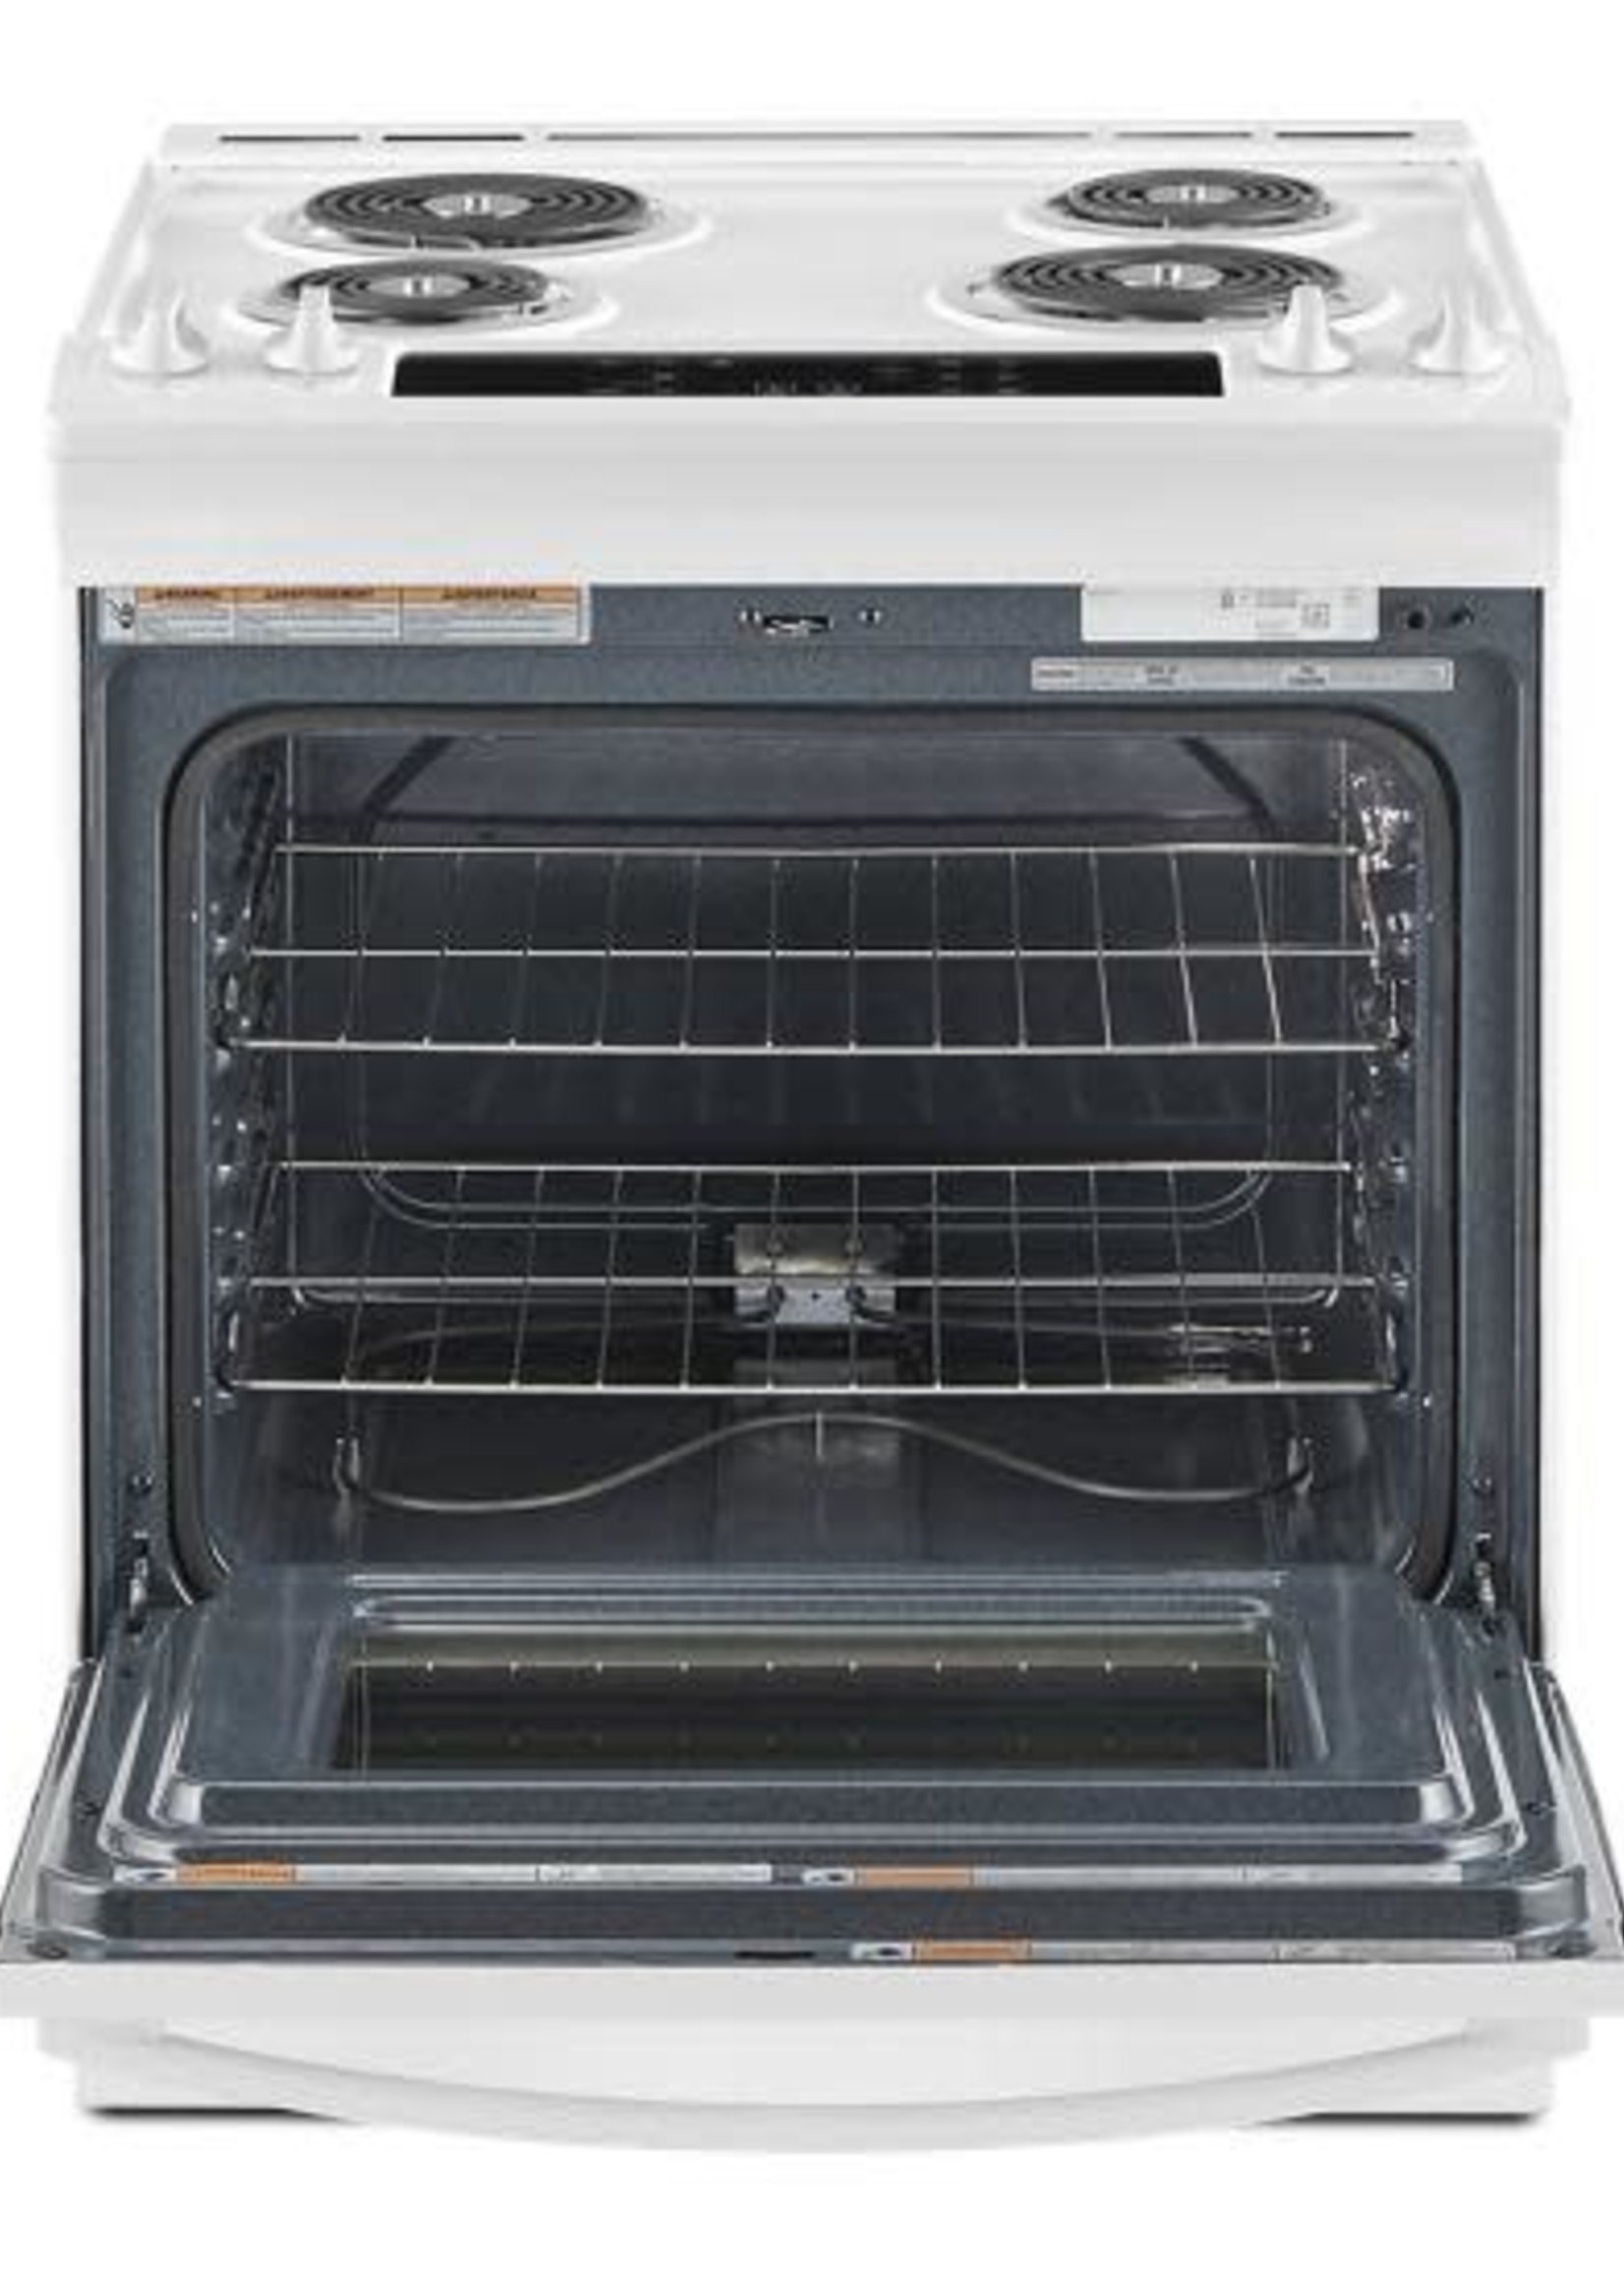 *Whirlpool  WEC310S0LW  4.8-cu ft Slide-In Electric Range with Frozen Bake Technology - White